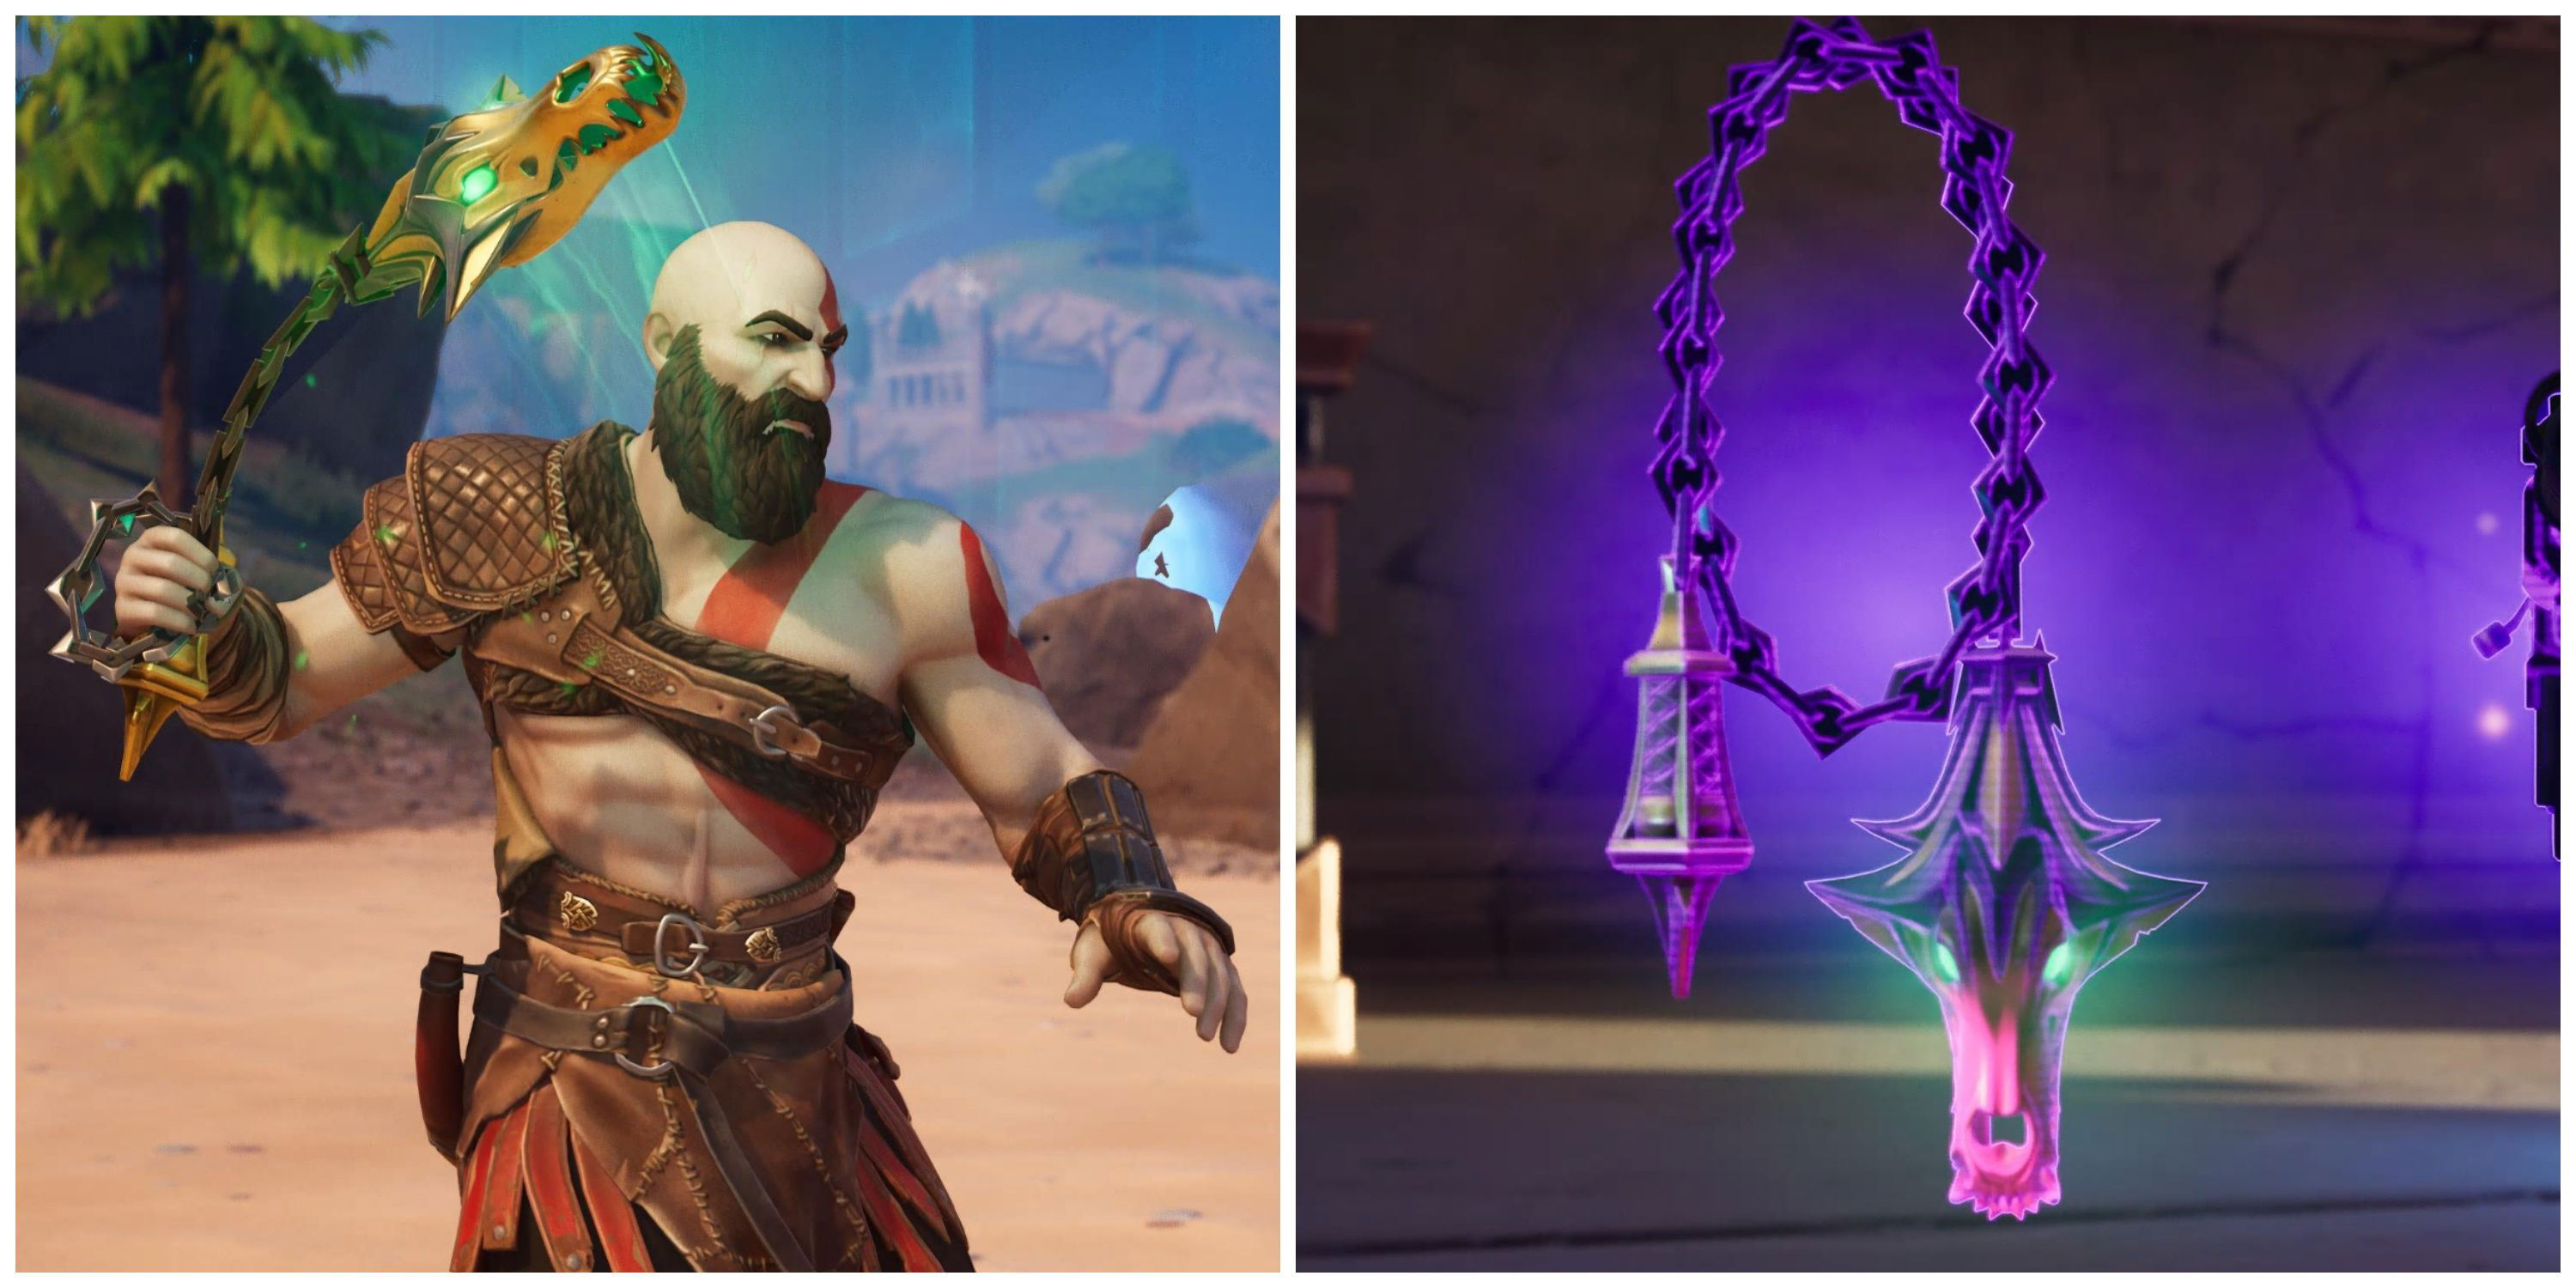 How To Get The Chains Of Hades In Fortnite